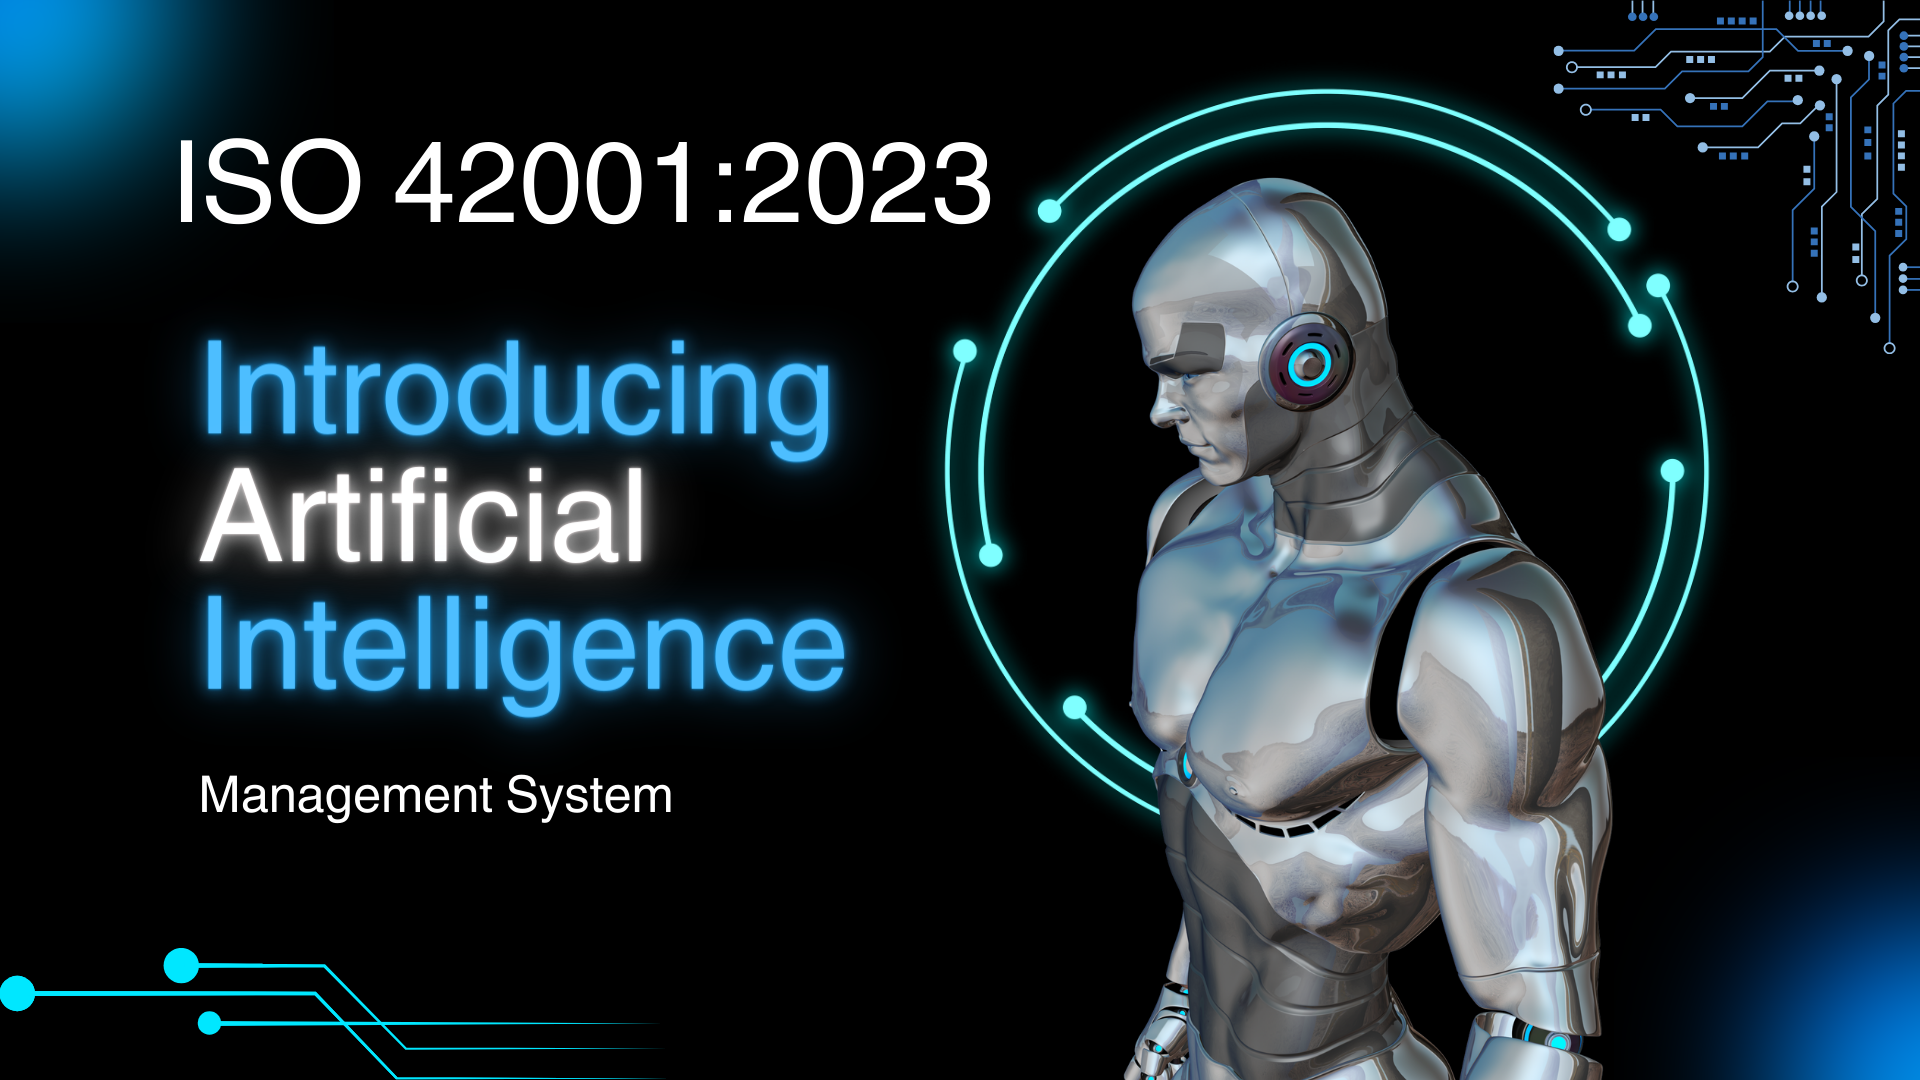 ISO 42001:2023 Artificial Intelligence Management System